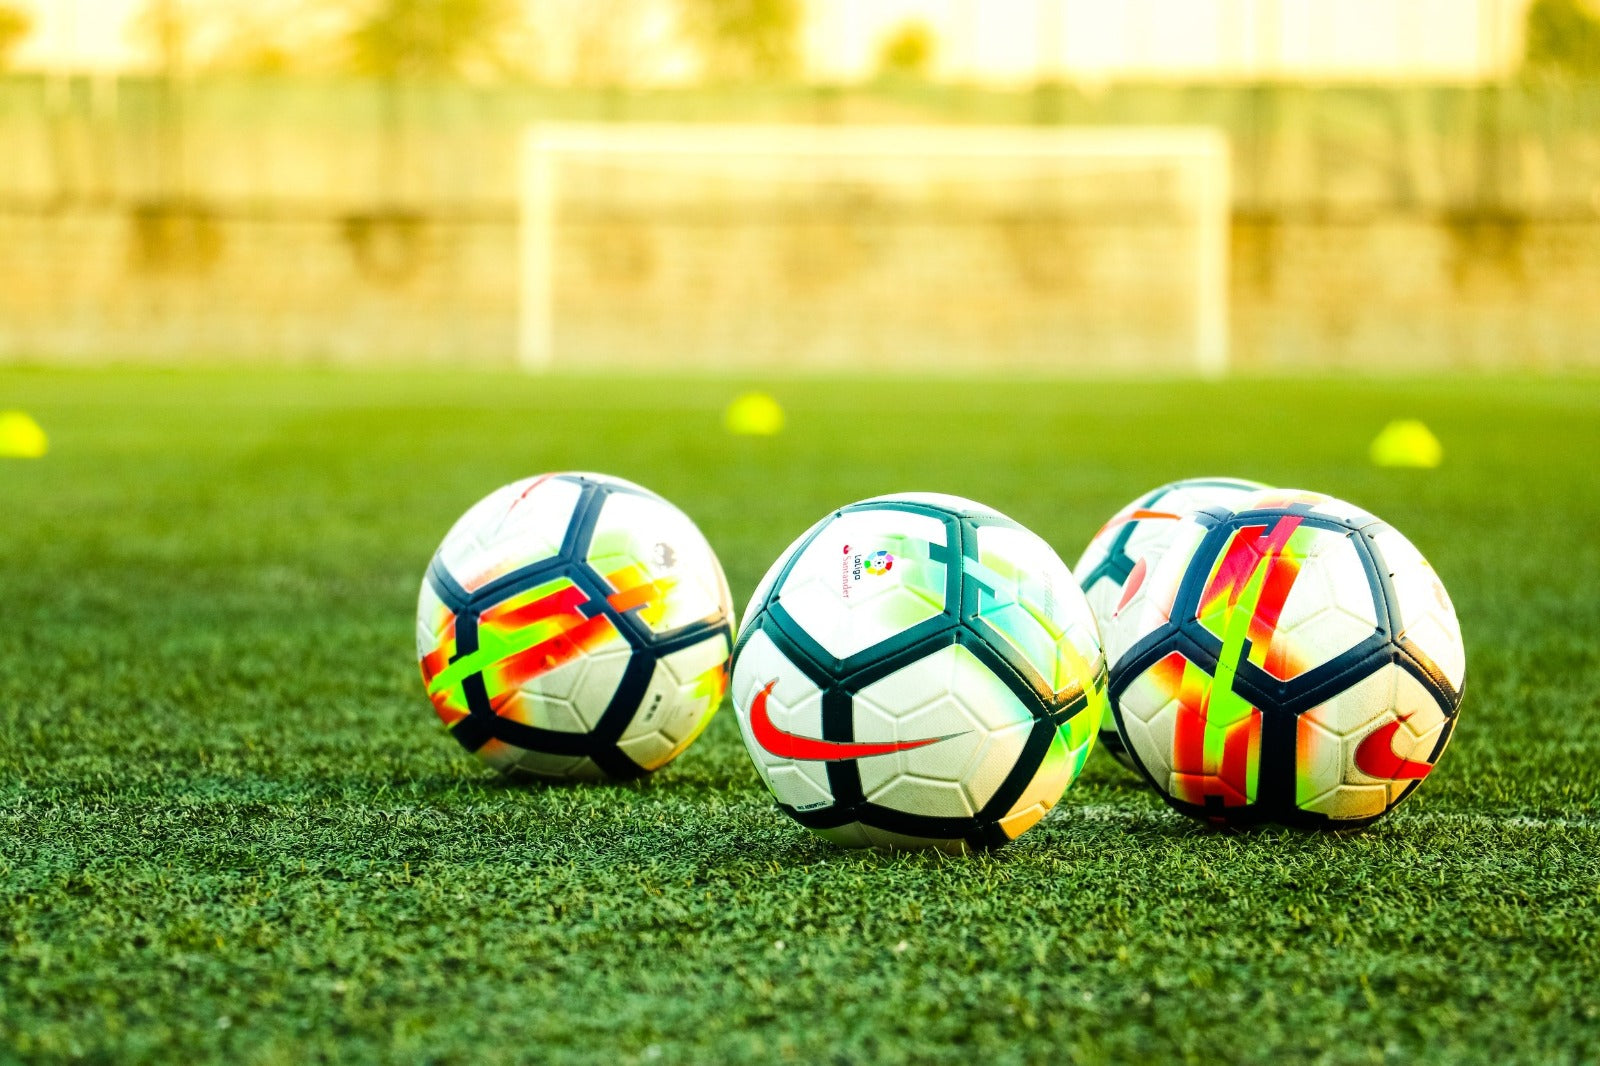 Official Soccer Balls and How they Evolved